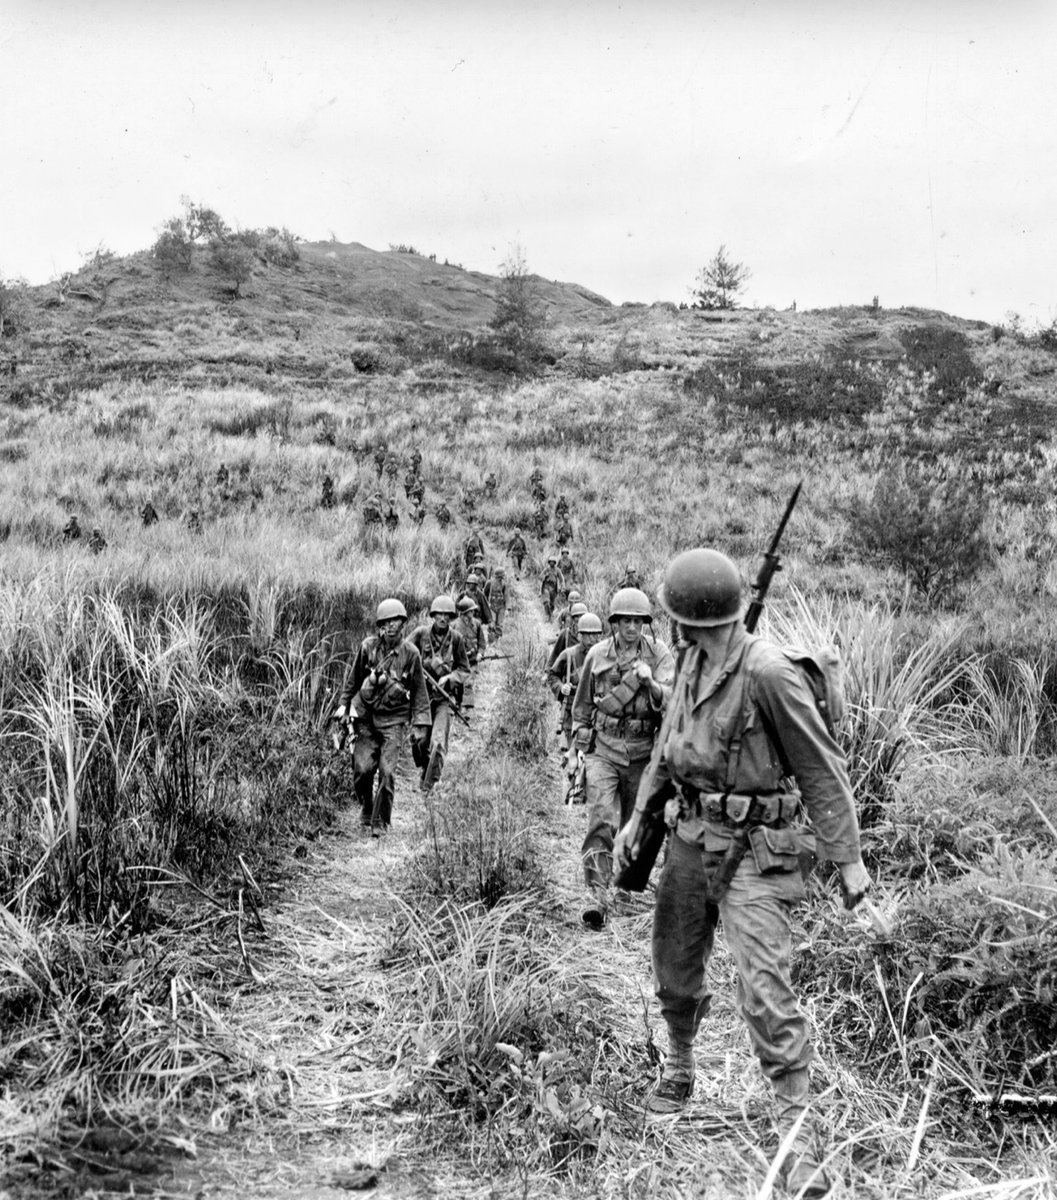 In July of 1944, soldiers of the 77th Infantry Division move out from high ground in search of the enemy on Guam. 🪖